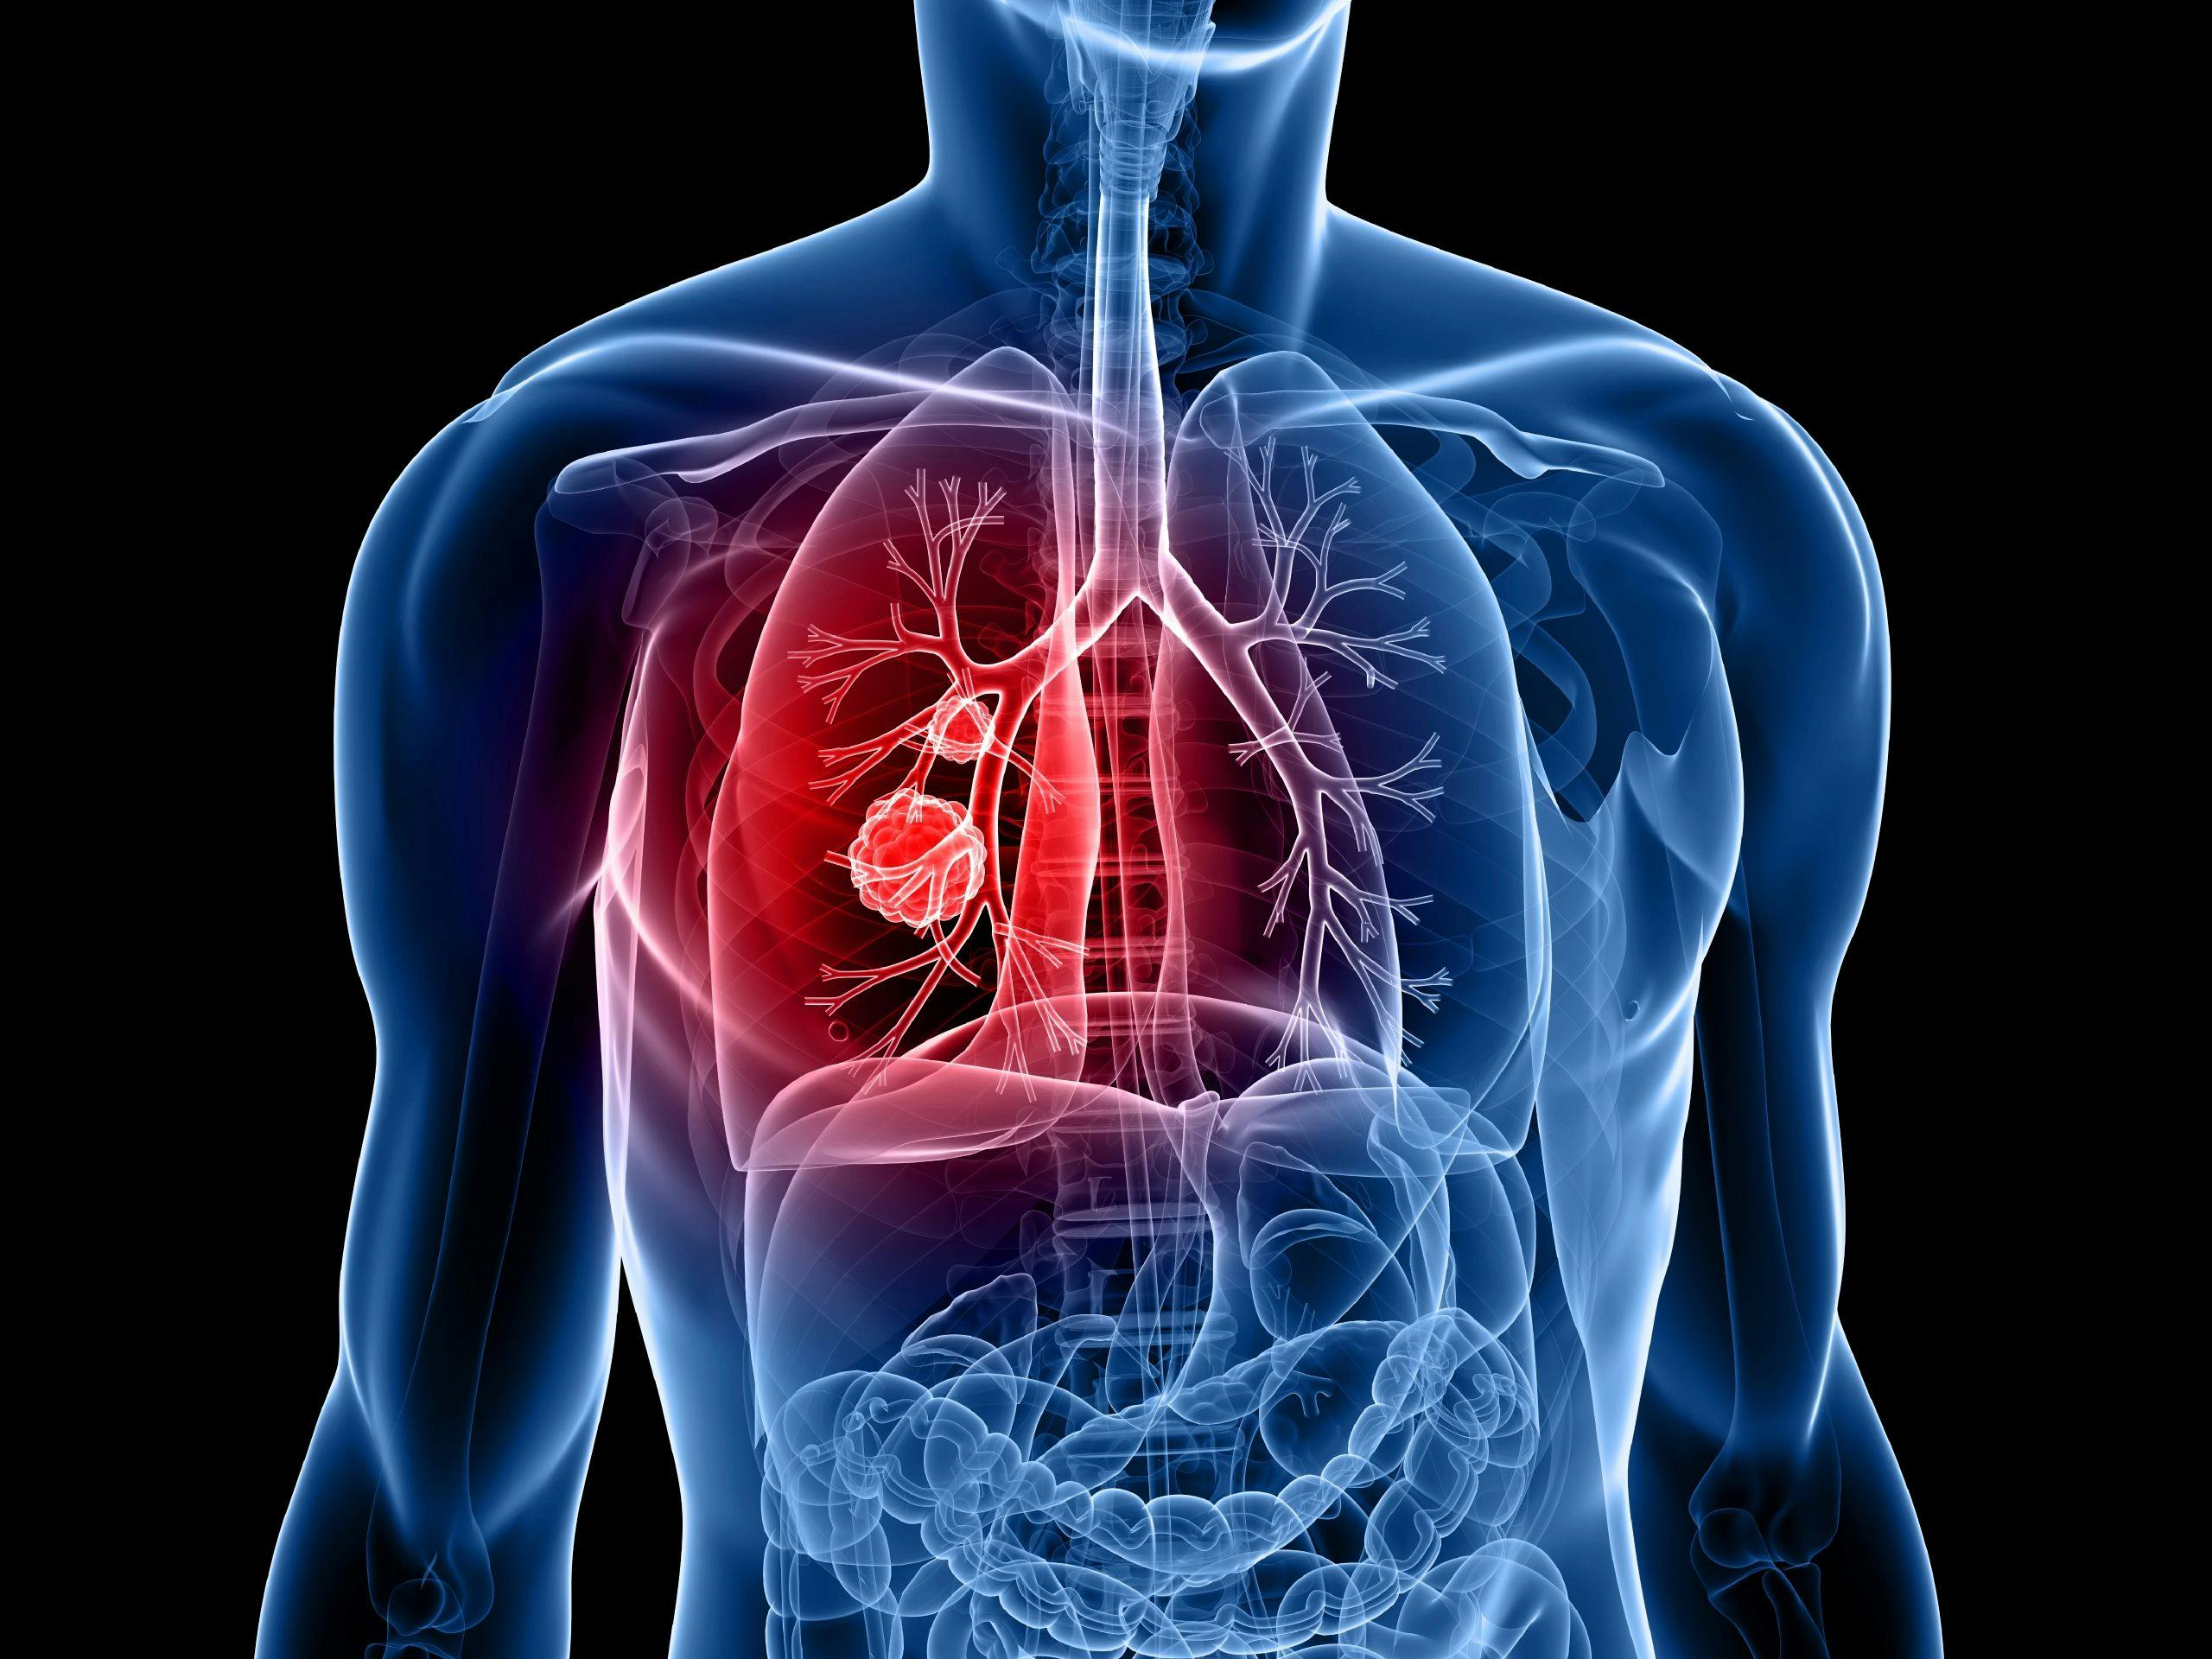 Genentech’s Subcutaneous Tecentriq Demonstrates Positive Phase 3 Results for NSCLC